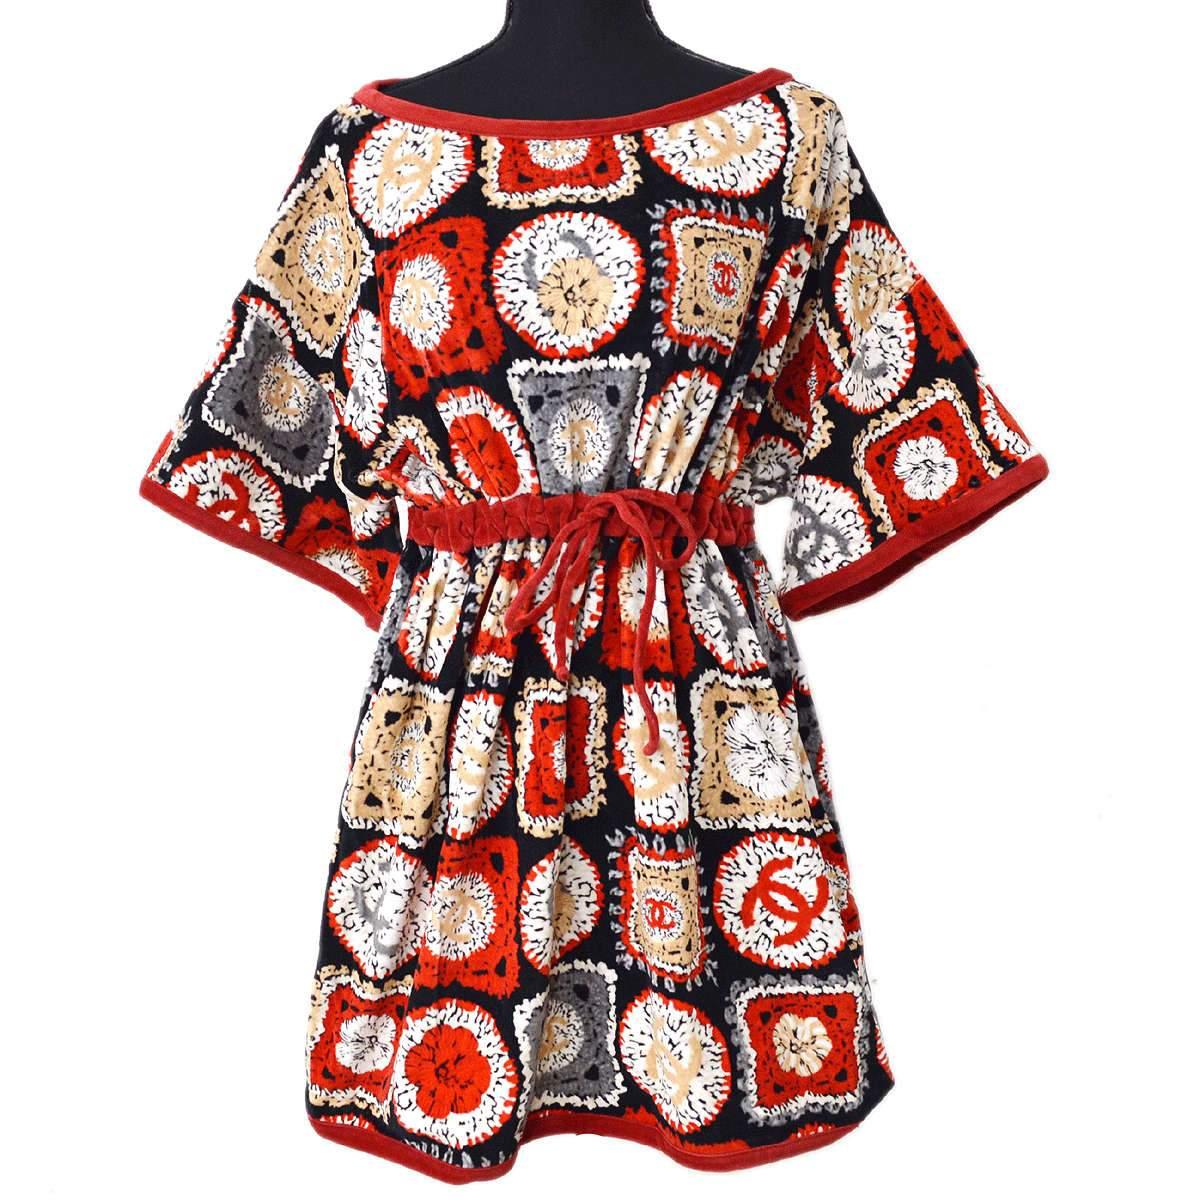 Chanel 2009 Spring Cc Graphic-print Mini Dress #44 in Red